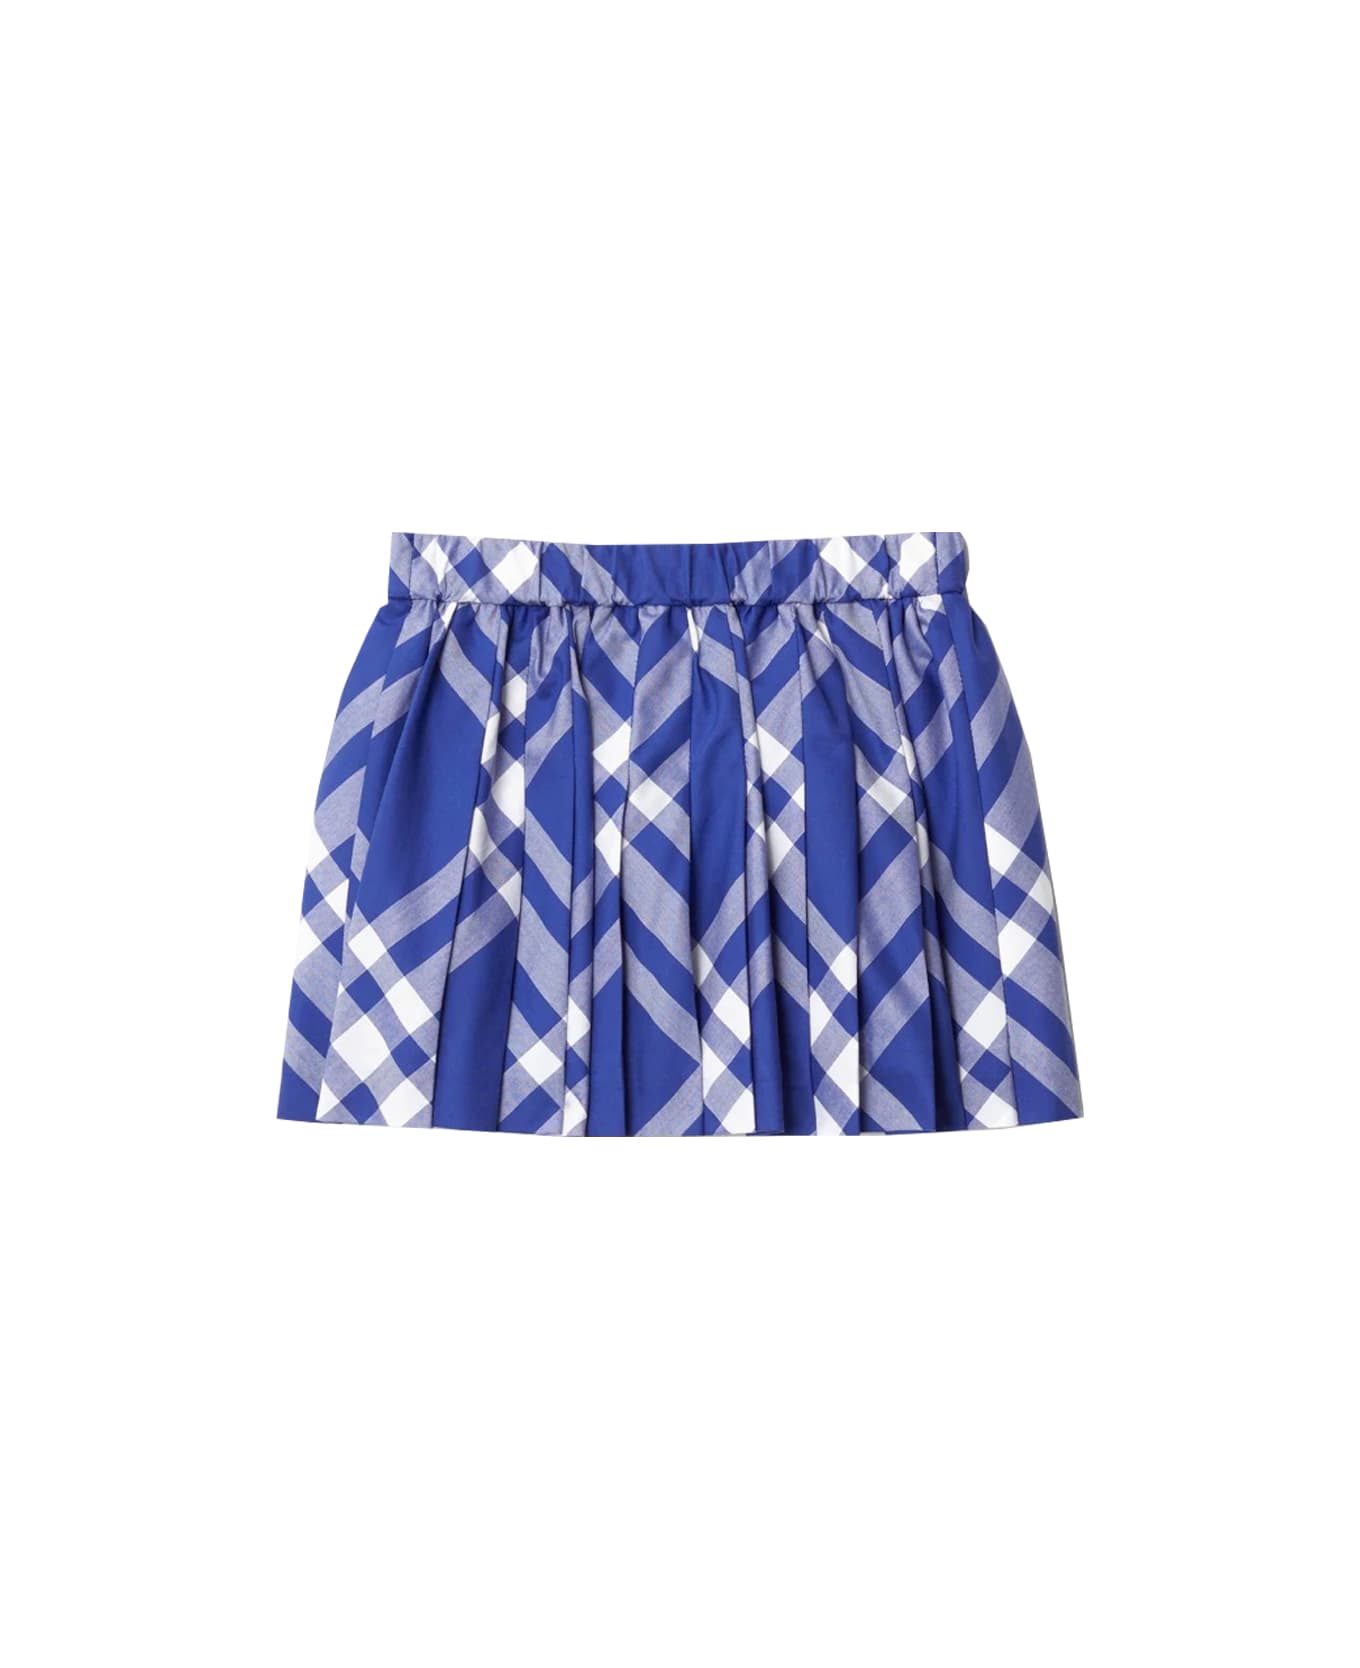 Burberry Pleated Skirt In Check Cotton - Blue ボトムス